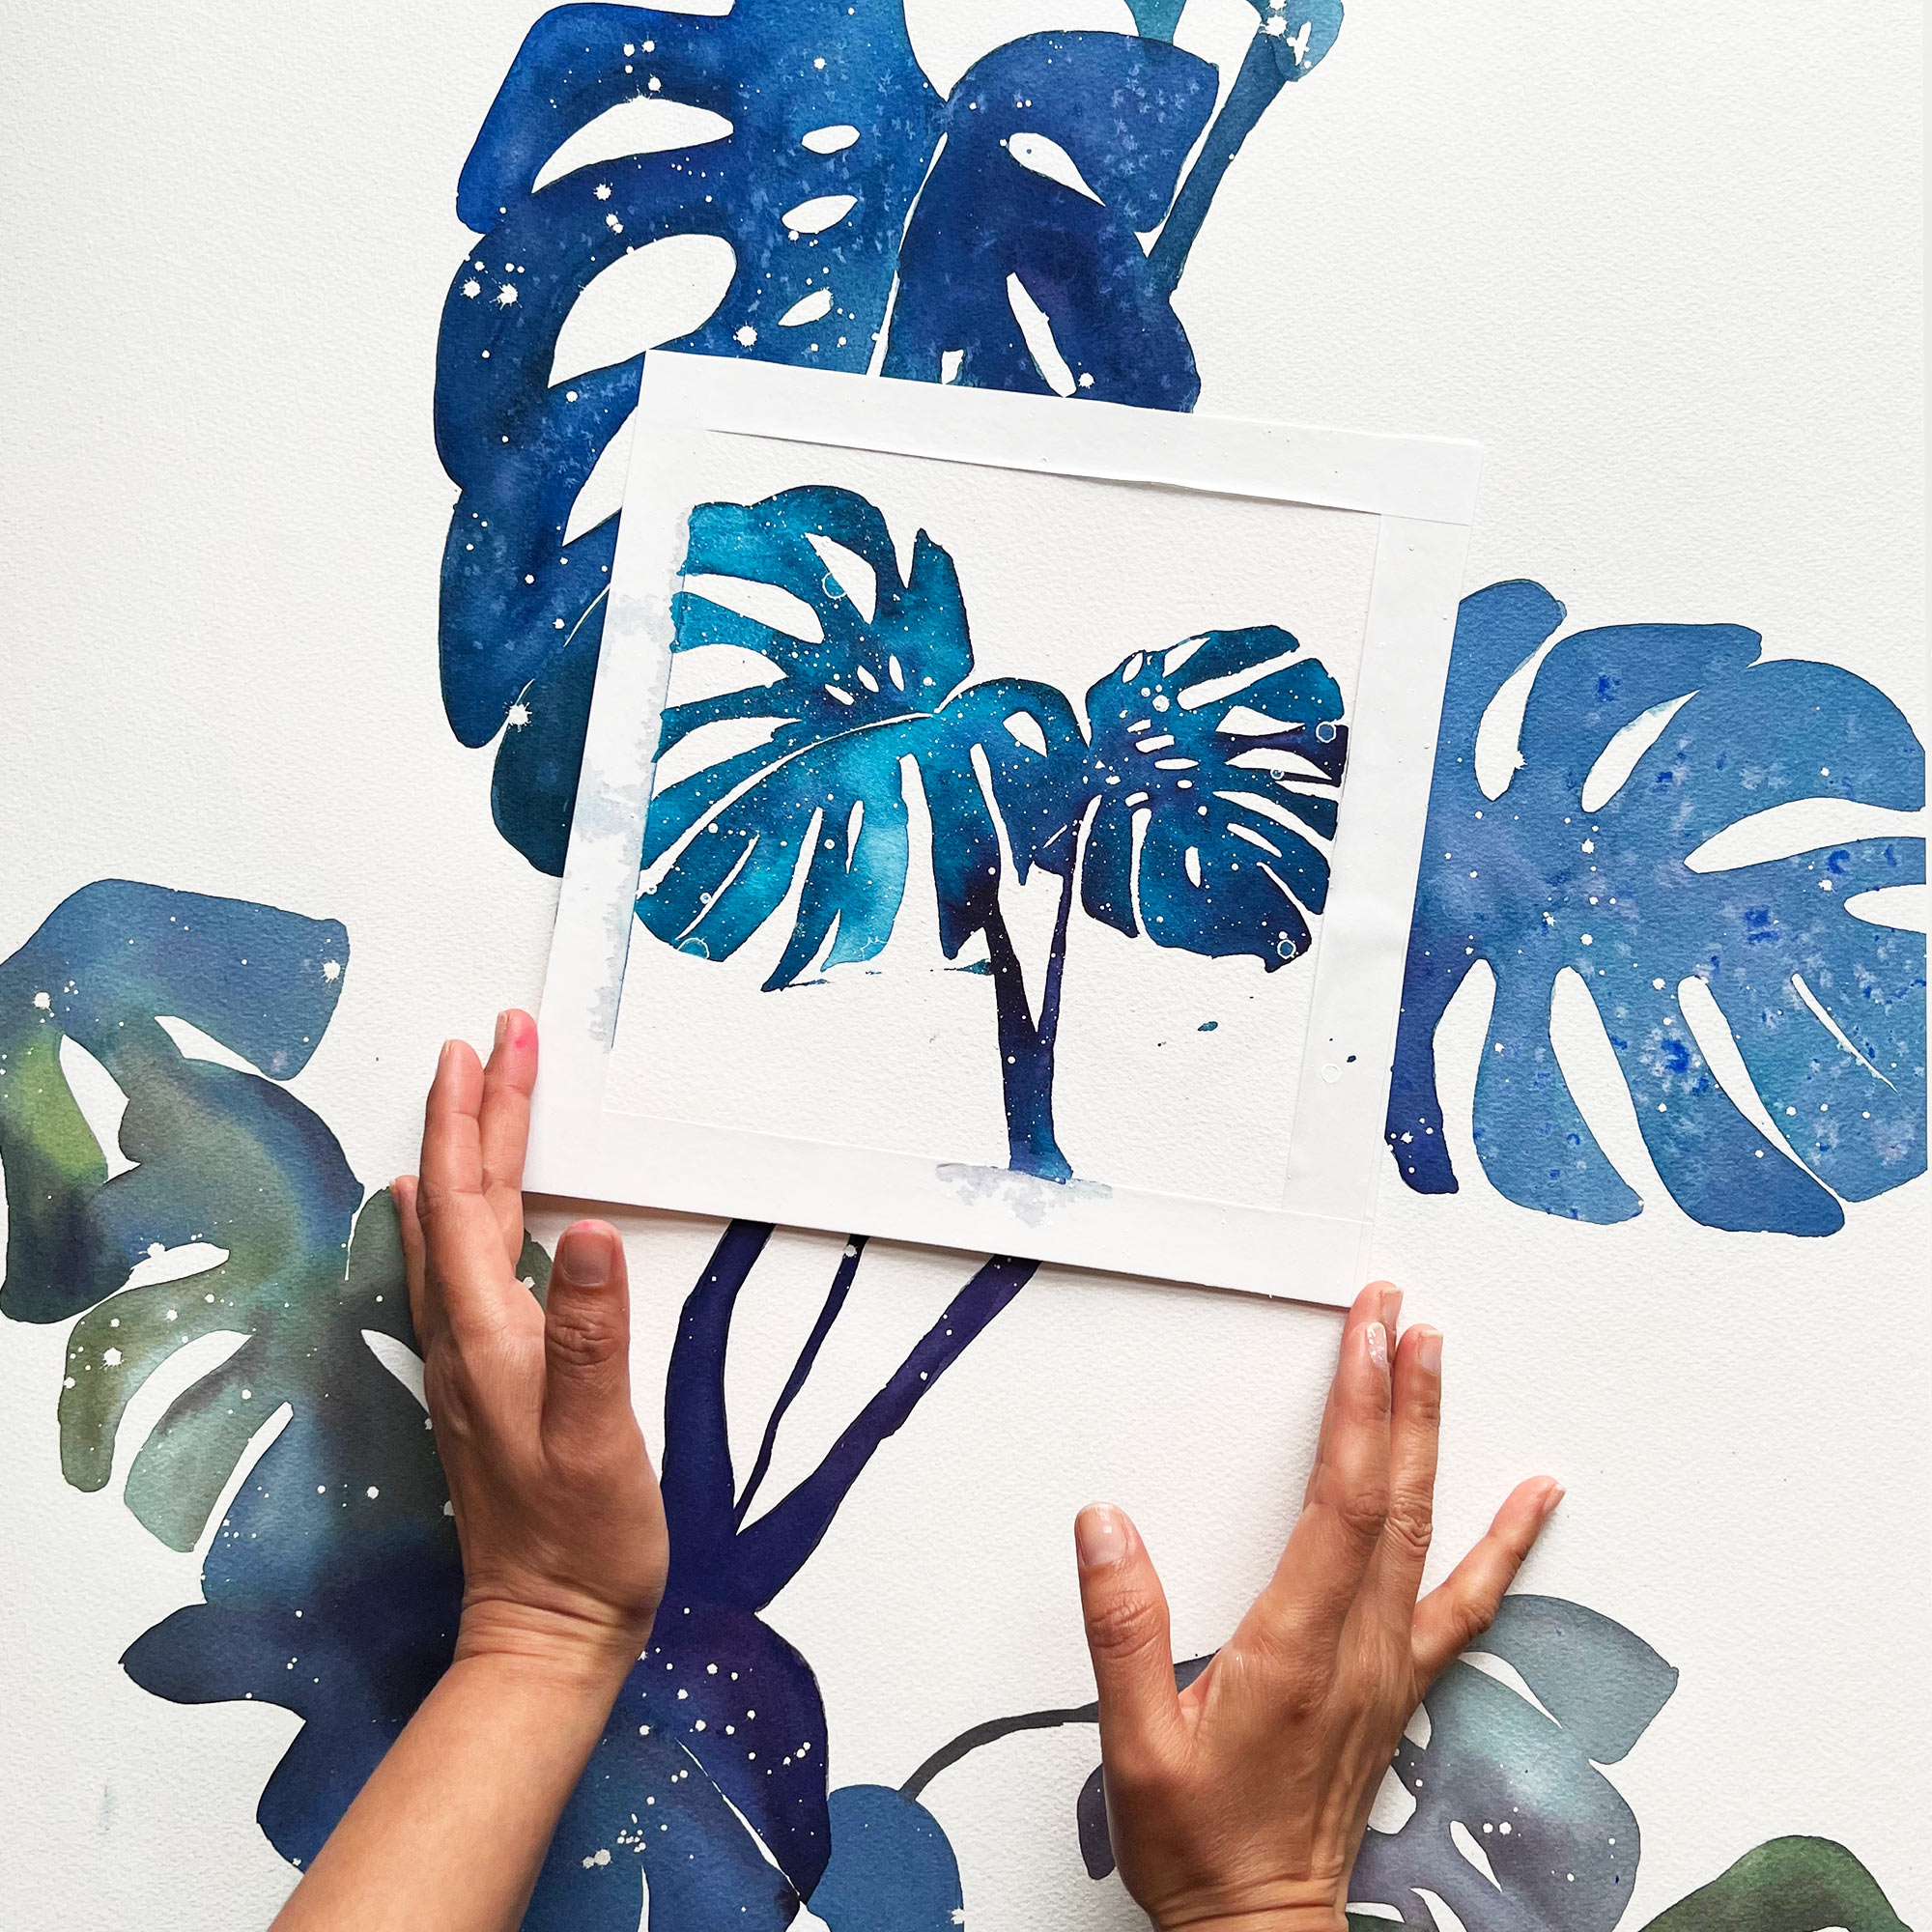 Learn how to paint a mostera leaf with watercolor, online class. Ingrid Sanchez | CreativeIngrid.